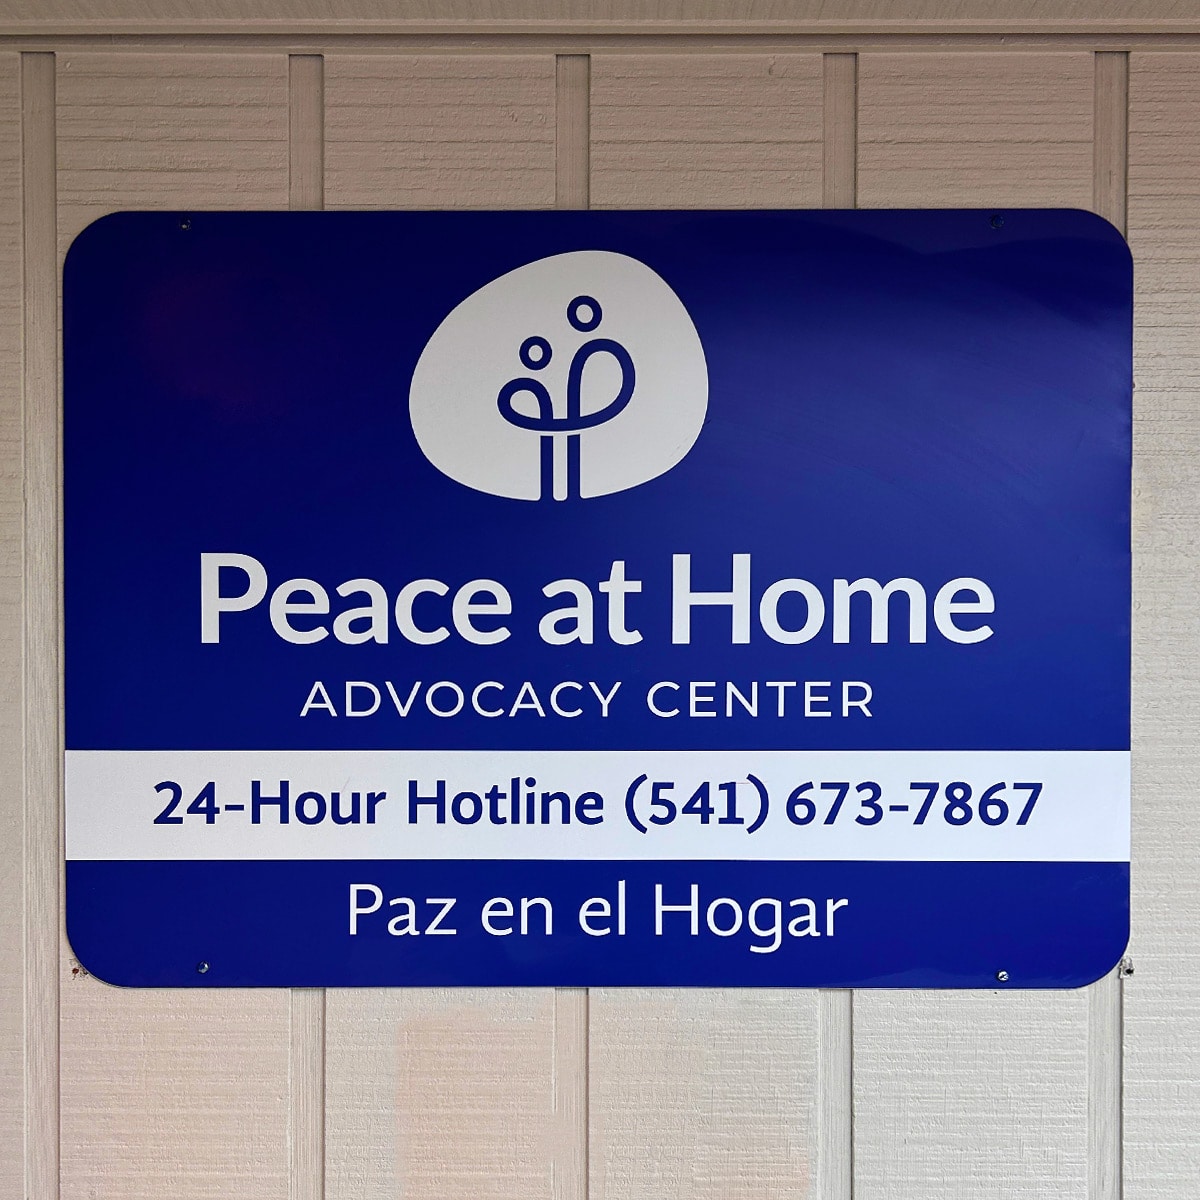 Building sign for Peace at Home Advocacy Center.